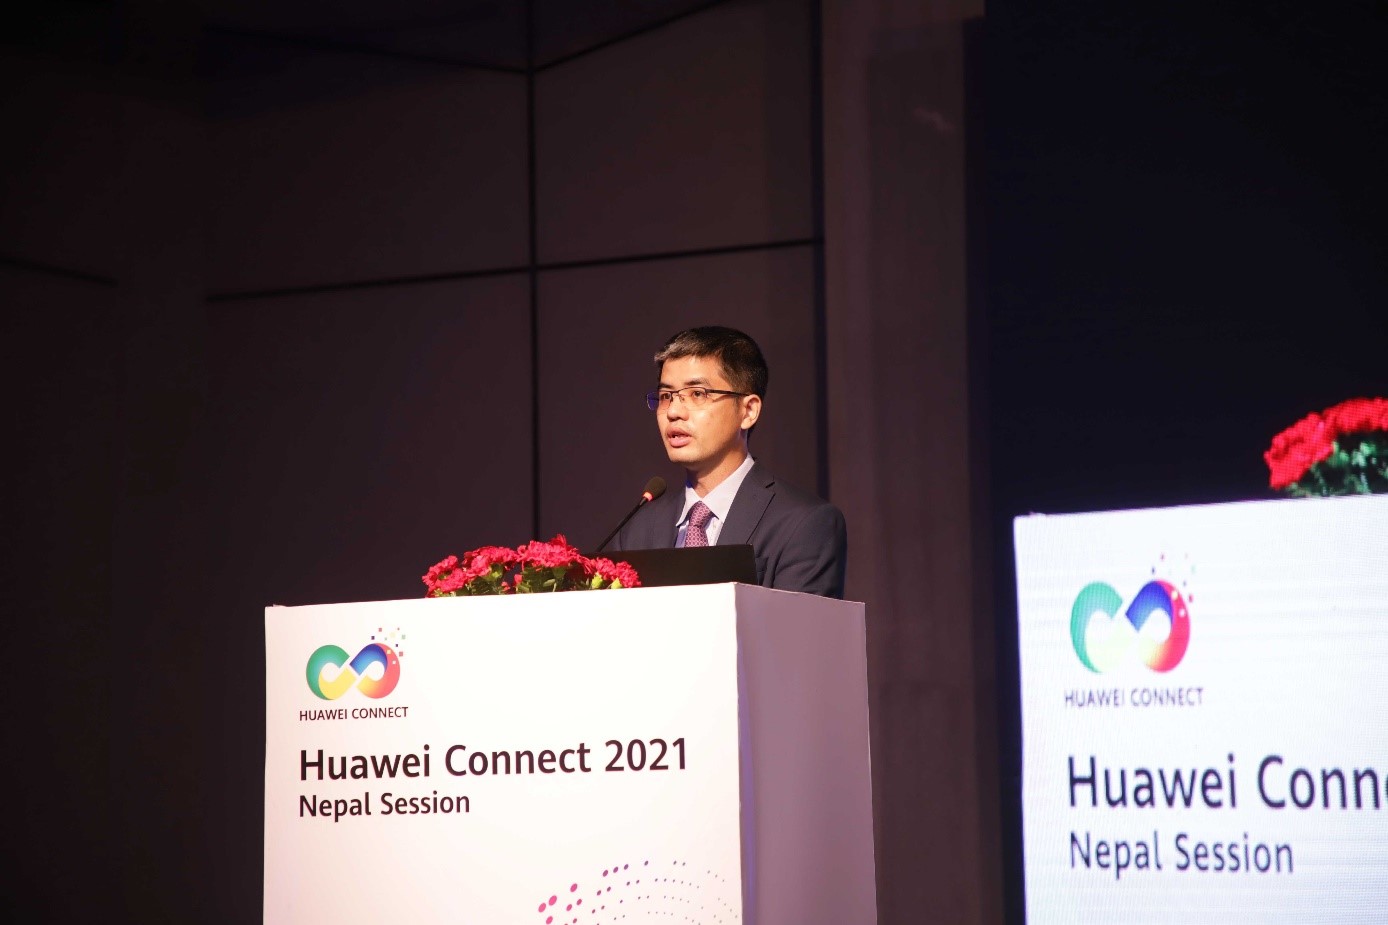 Mr. Leo Huang - Huawei Asia Pacific Solution Director of FusionSolar solution